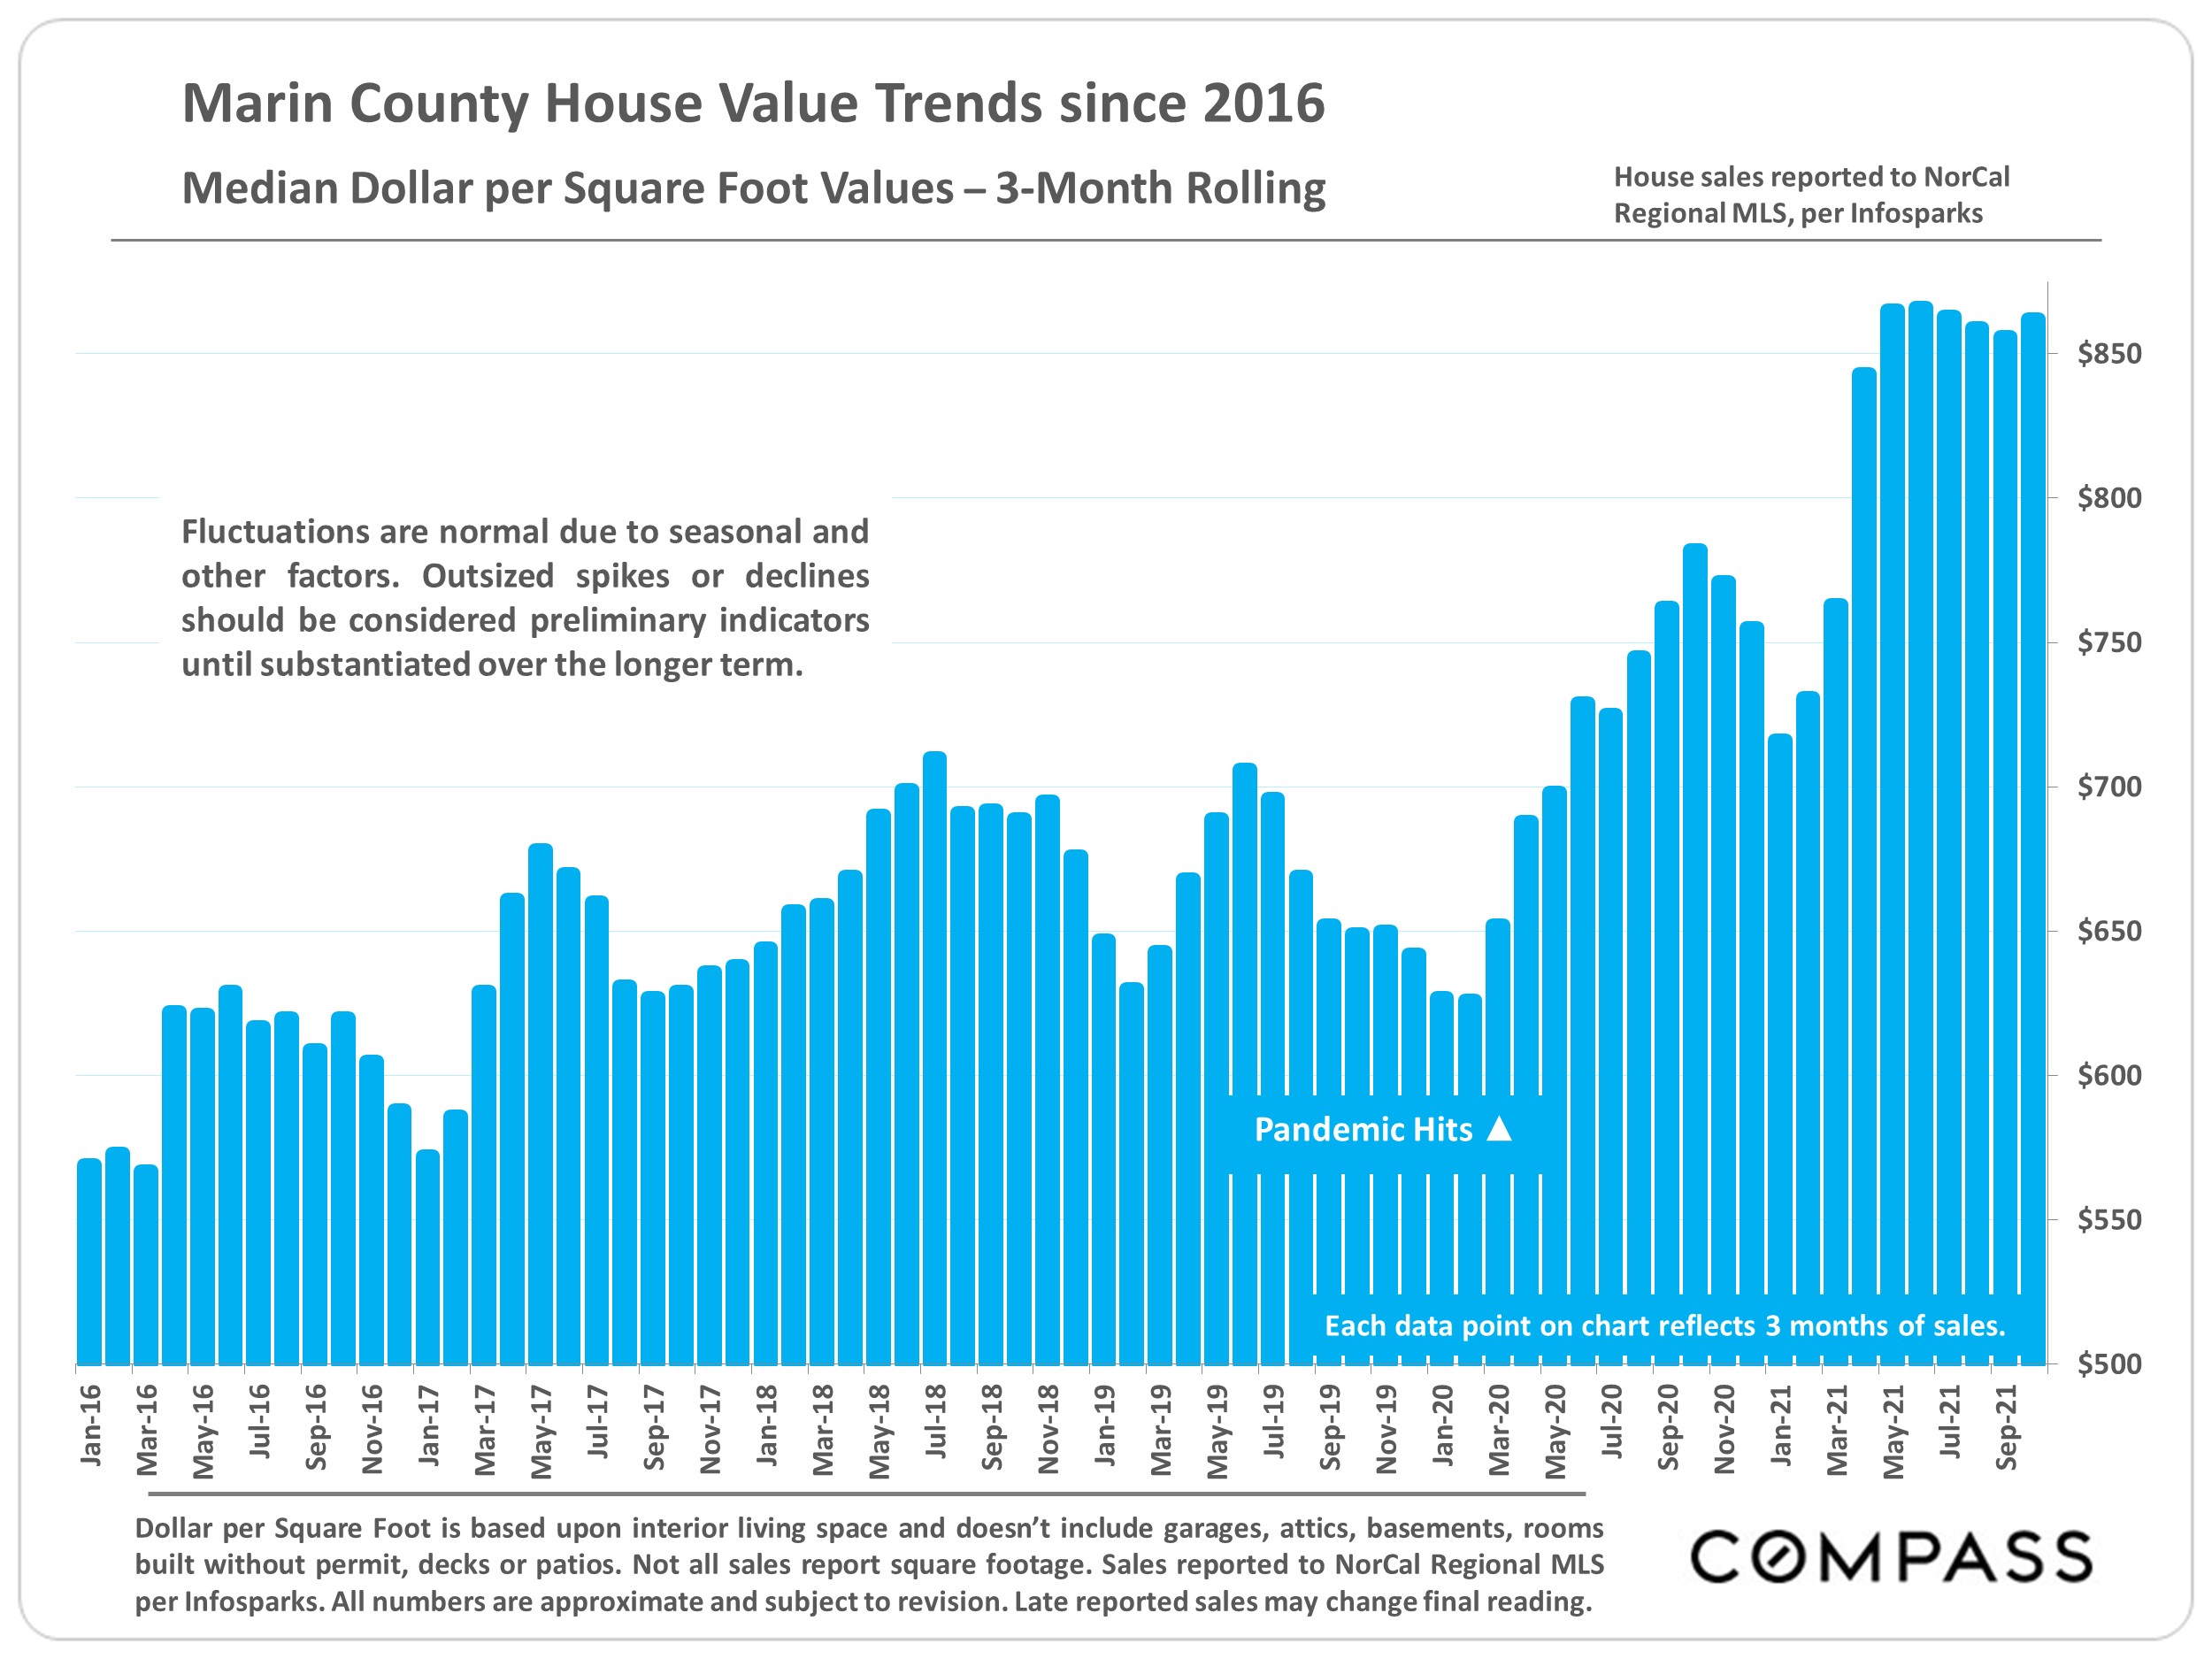 bar graph of marin county dollar per square foot house value trends